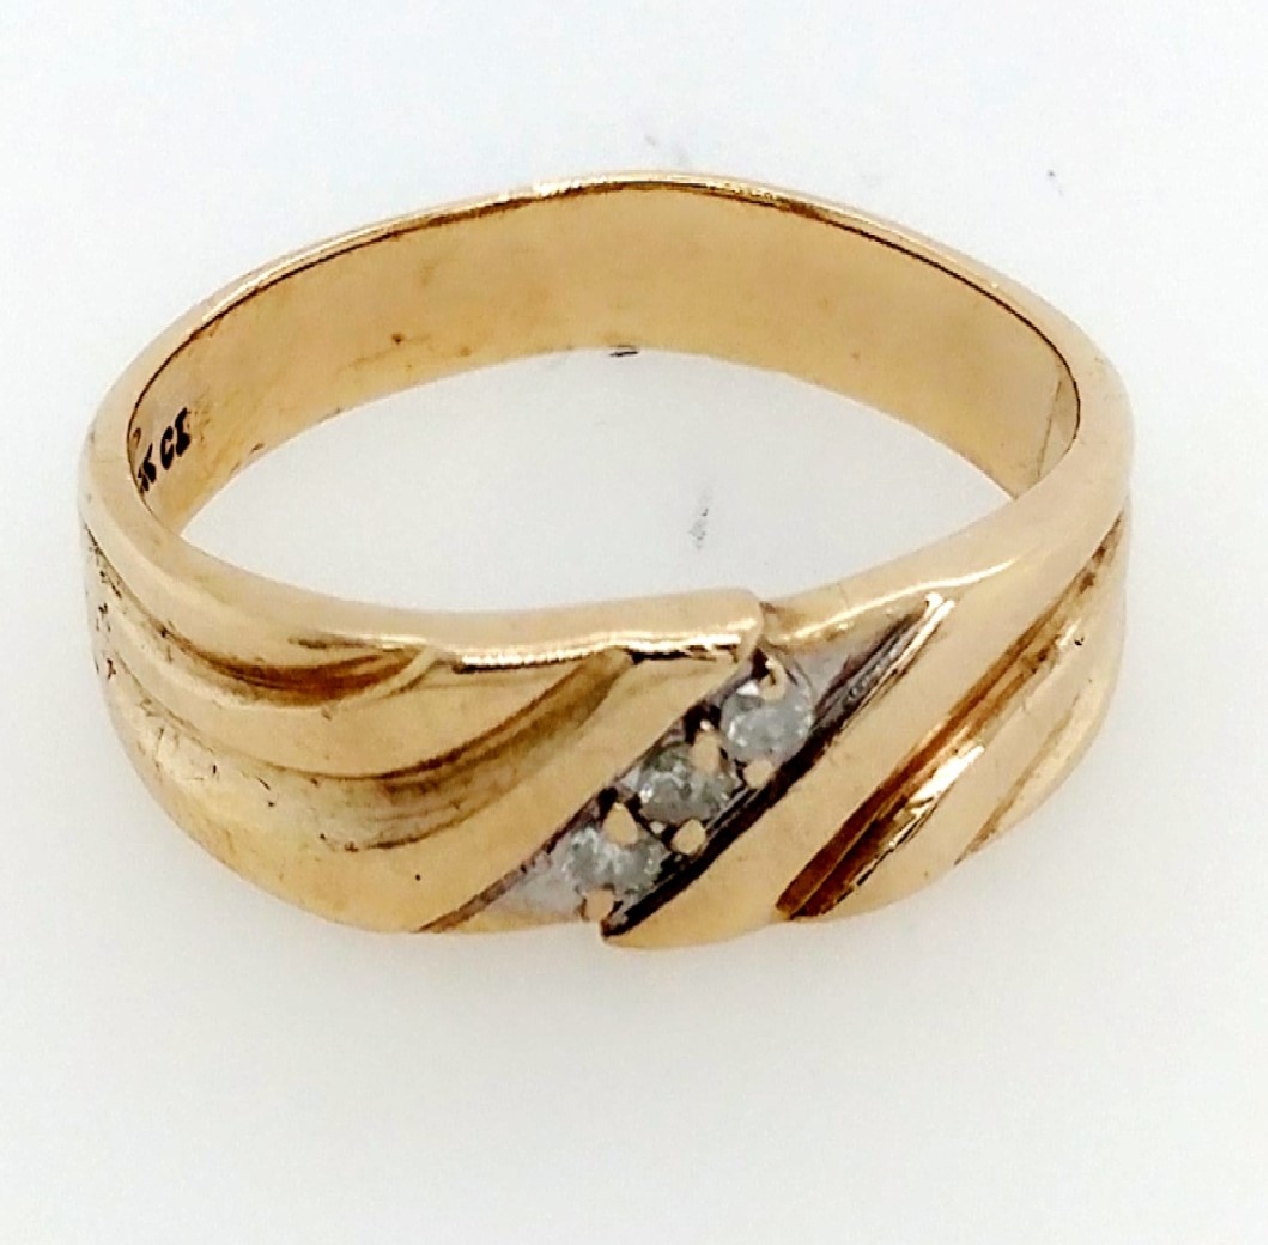 10K Yellow Gold Wedding Band with 3 Accent Diamonds
Size 10